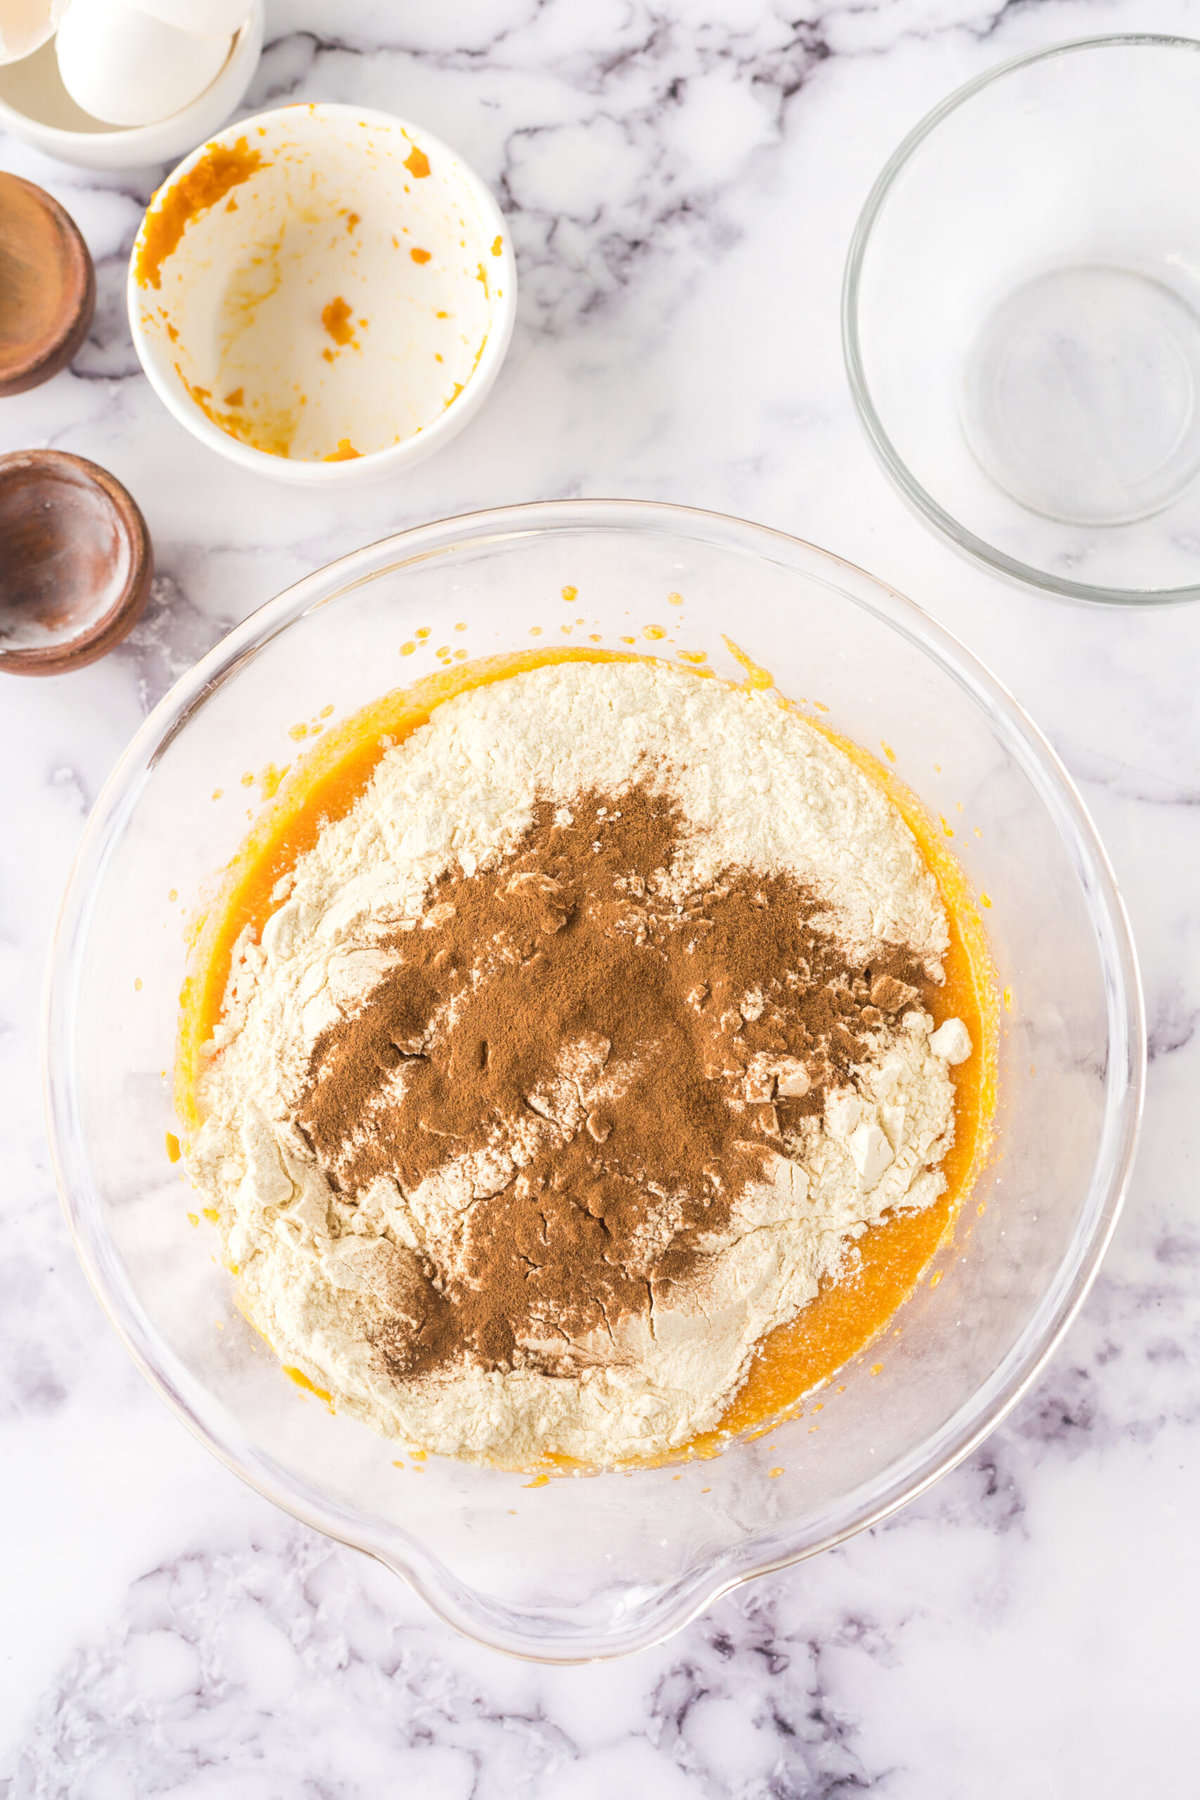 Topping the pumpkin mixture with flour and cinnamon in a bowl